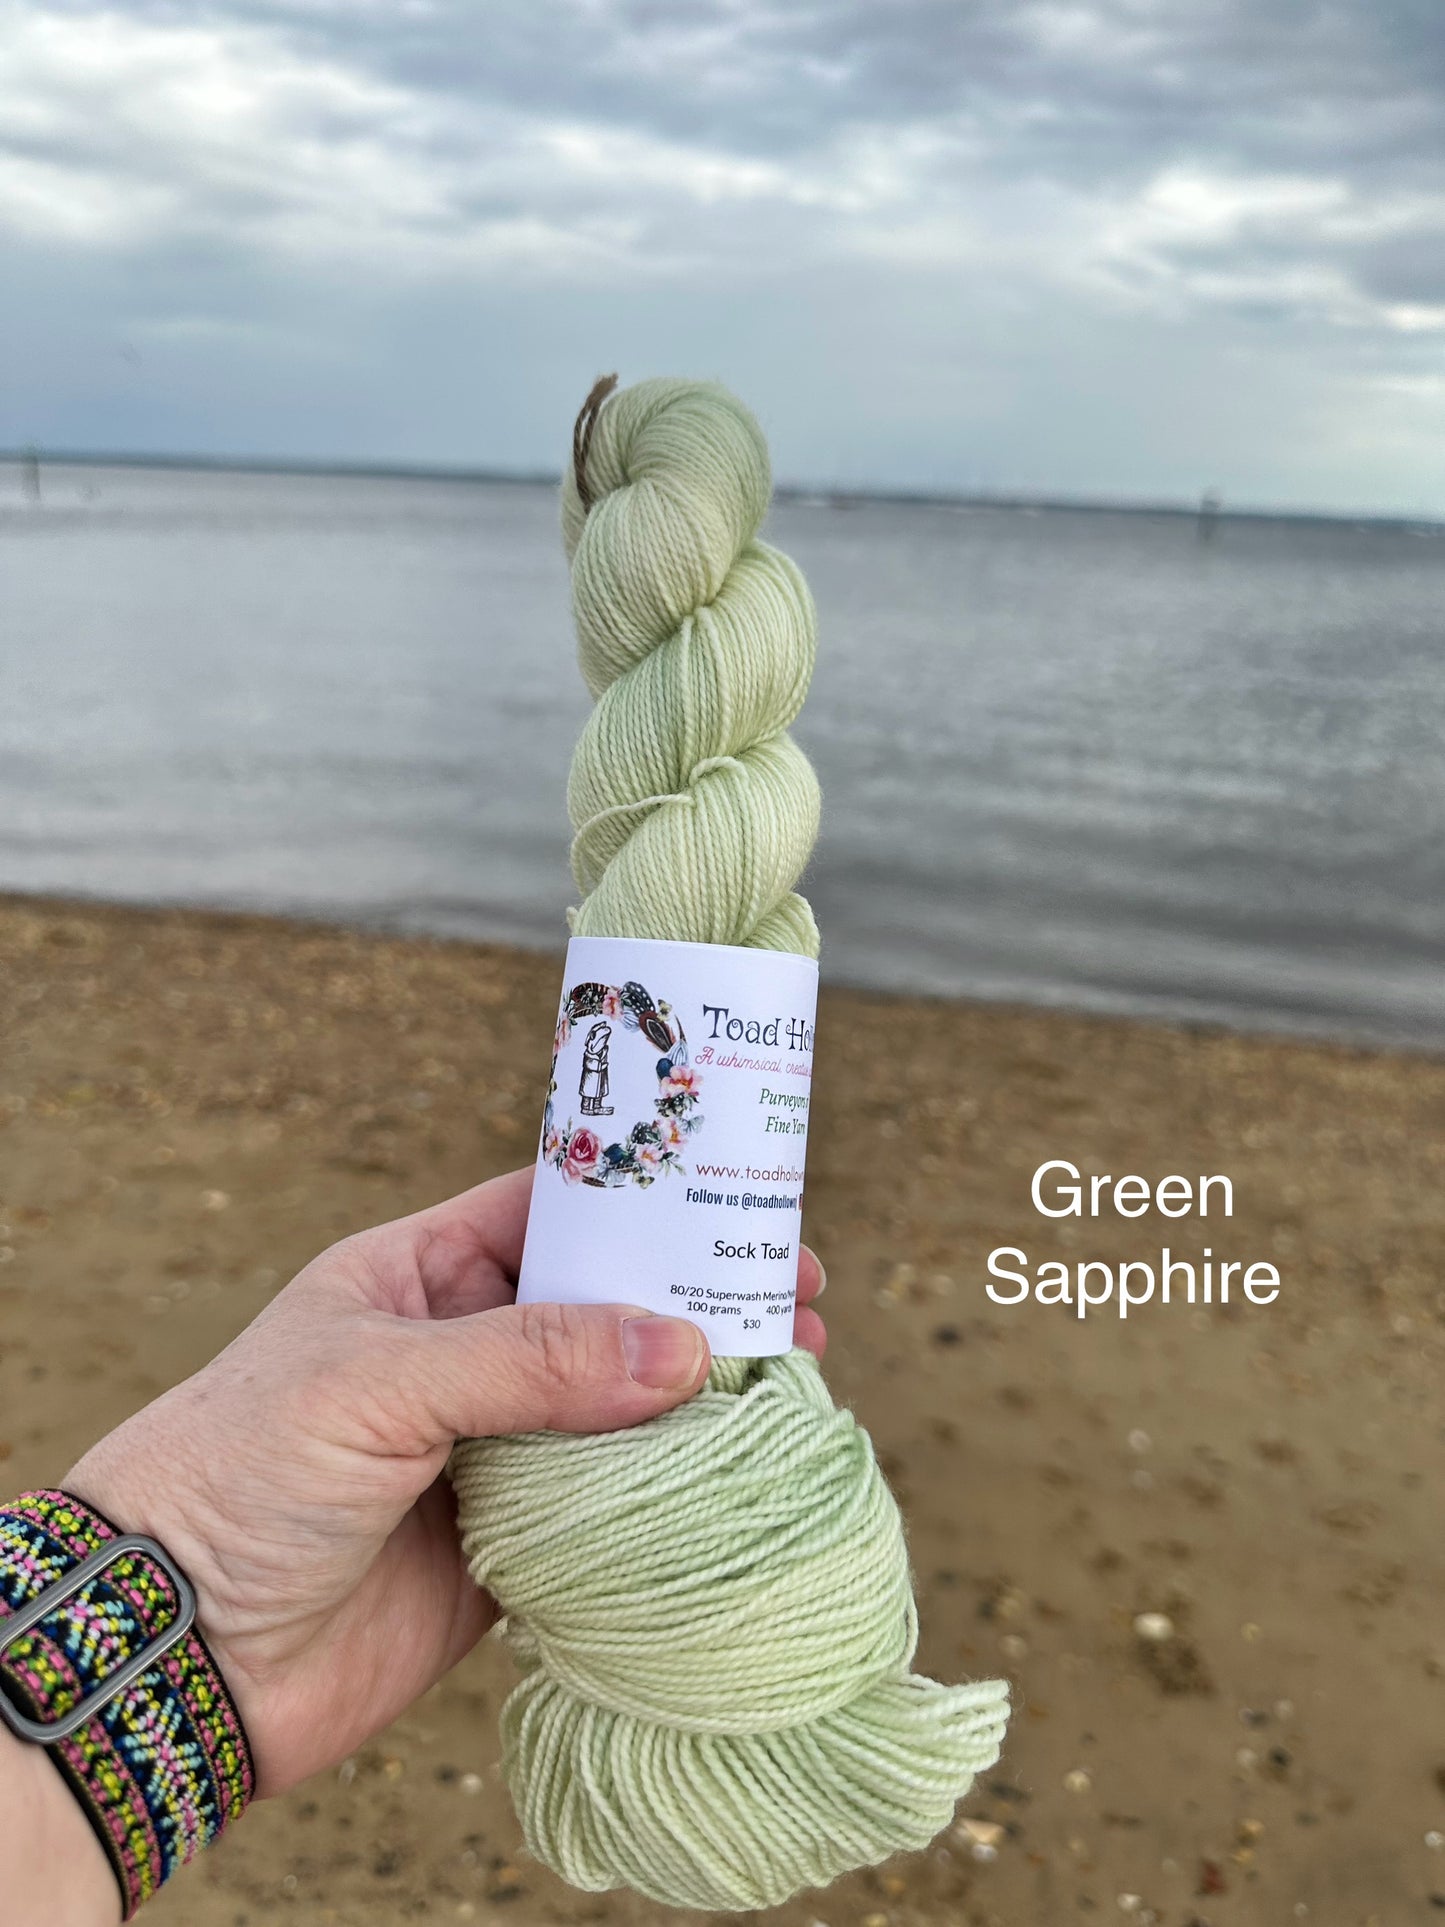 SEA GLASS Full Skeins from our Beachcomber collection, Toad Hollow Yarns